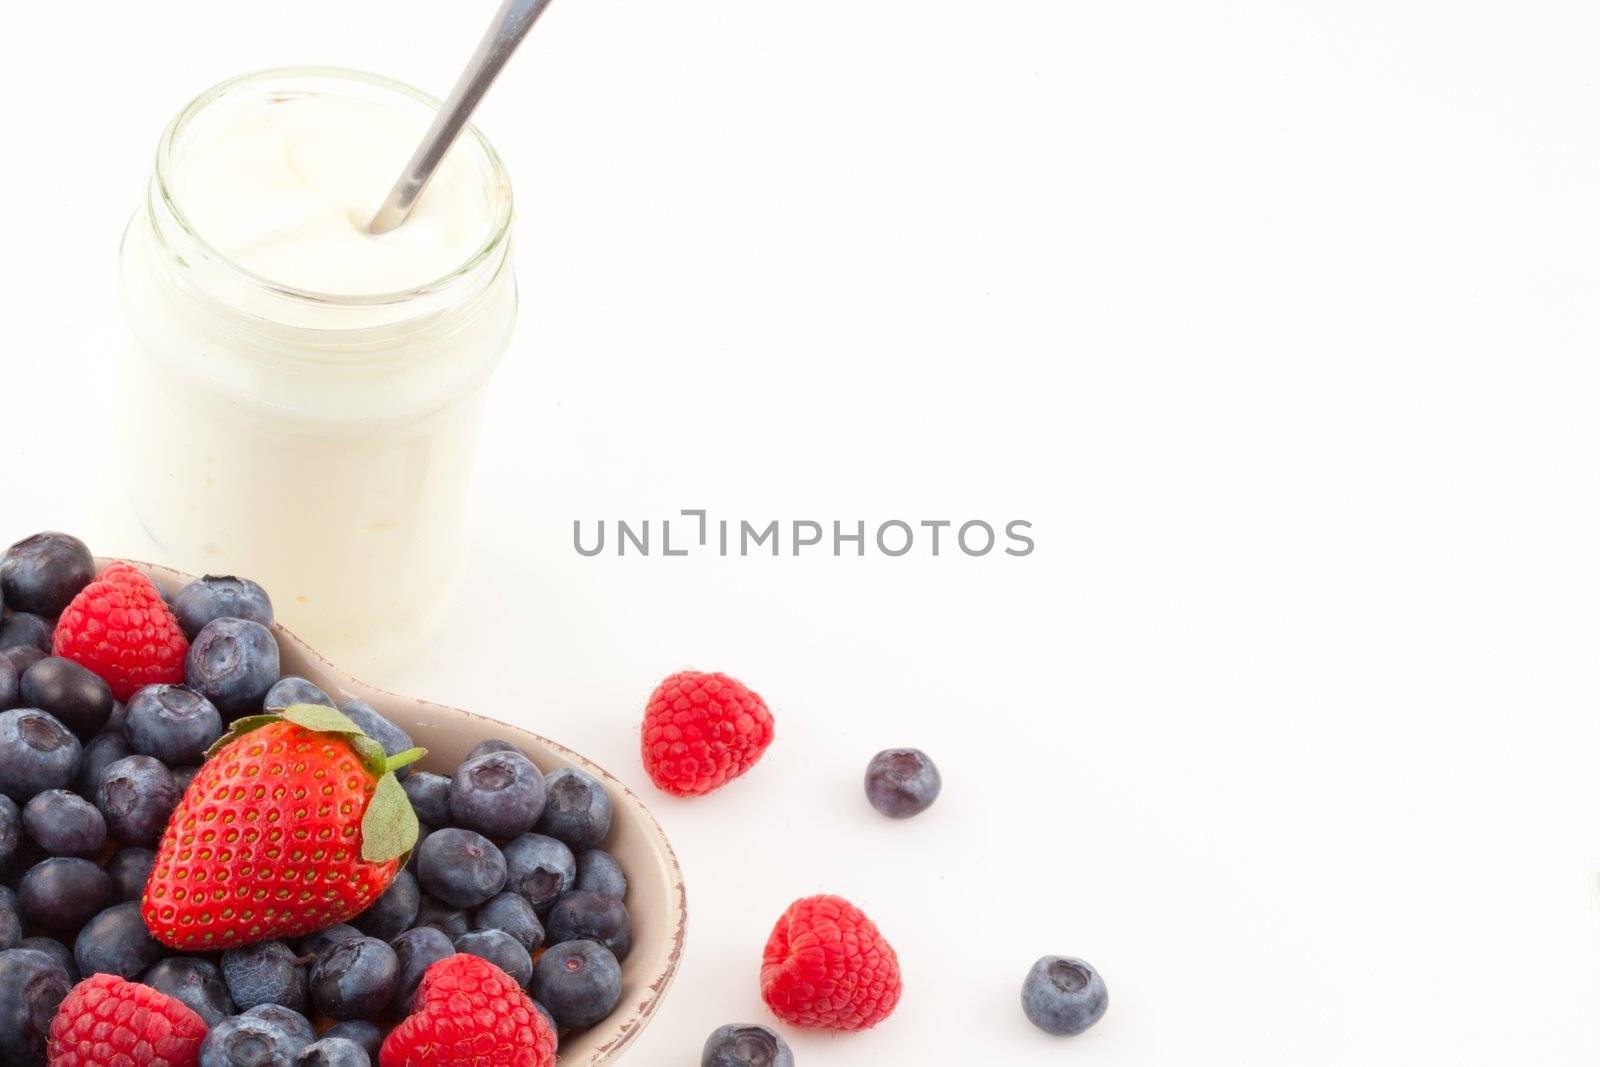 Yogurt and berries against a white background